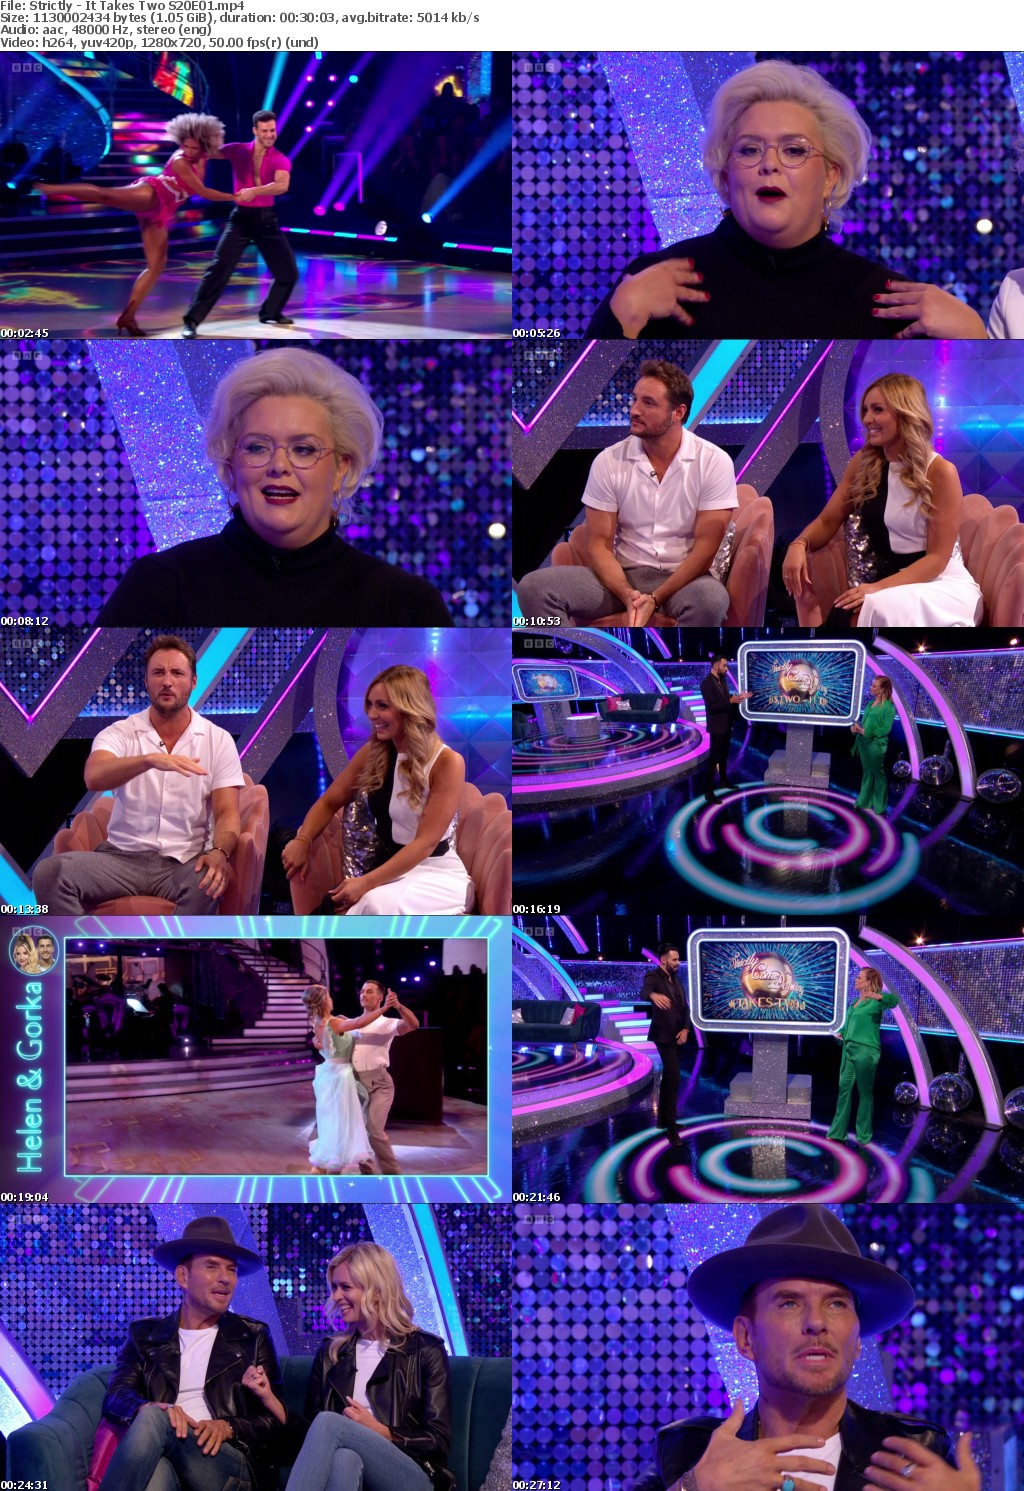 Strictly - It Takes Two S20E01 (1280x720p HD, 50fps, soft Eng subs)